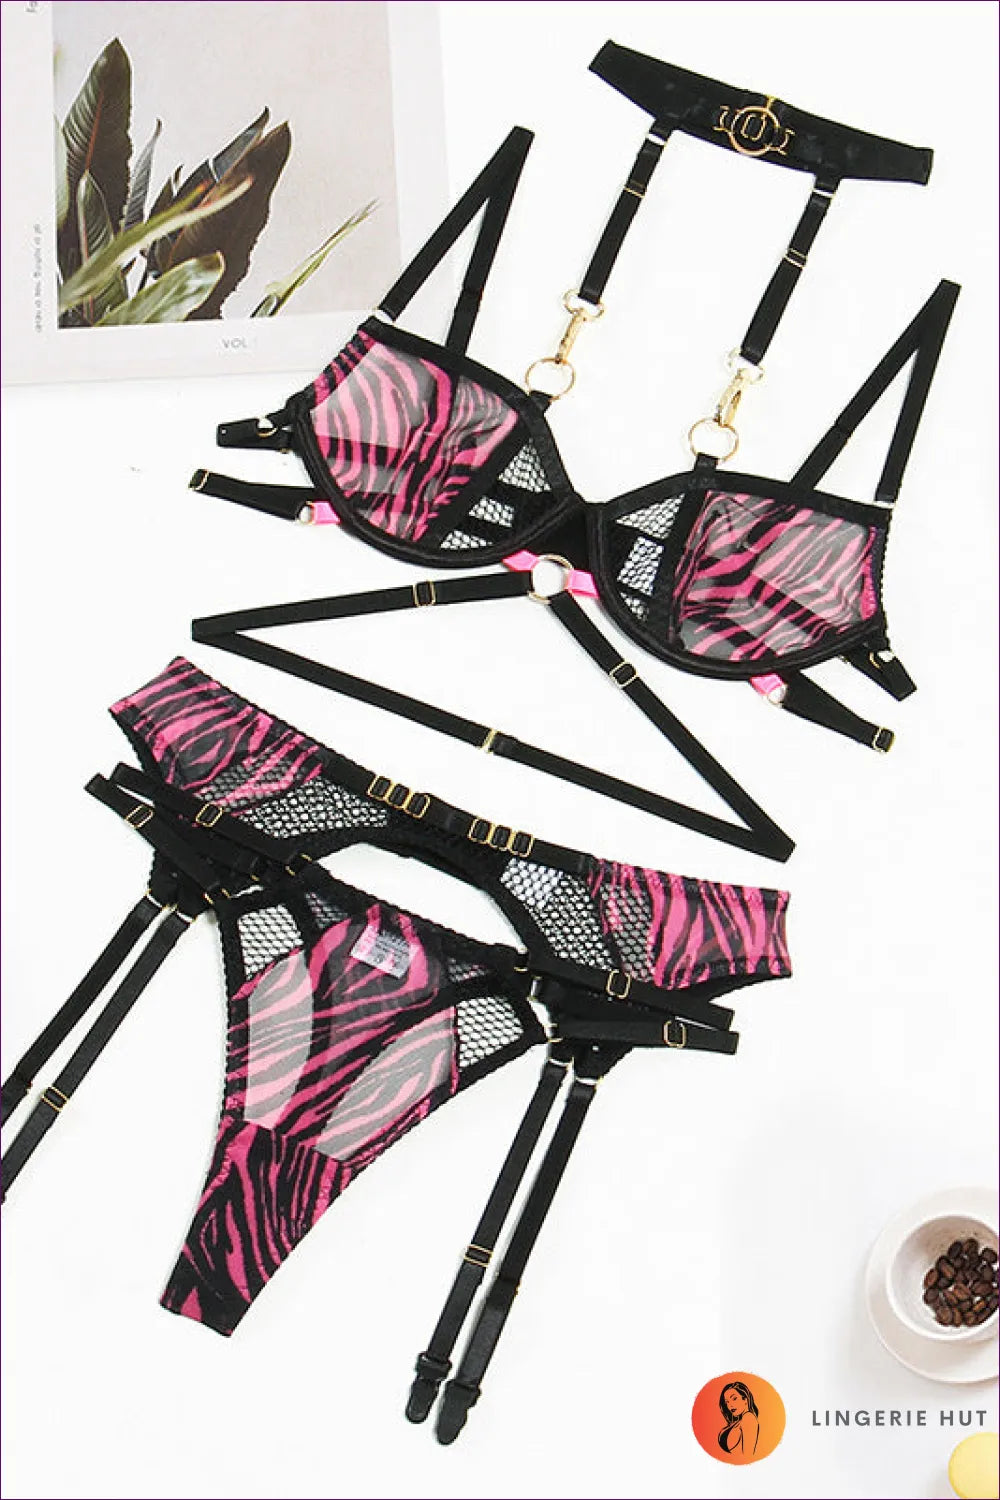 Turn Up The Heat With An Alluring Halter Mesh Lingerie Set. Features a Detachable Three-piece Design For